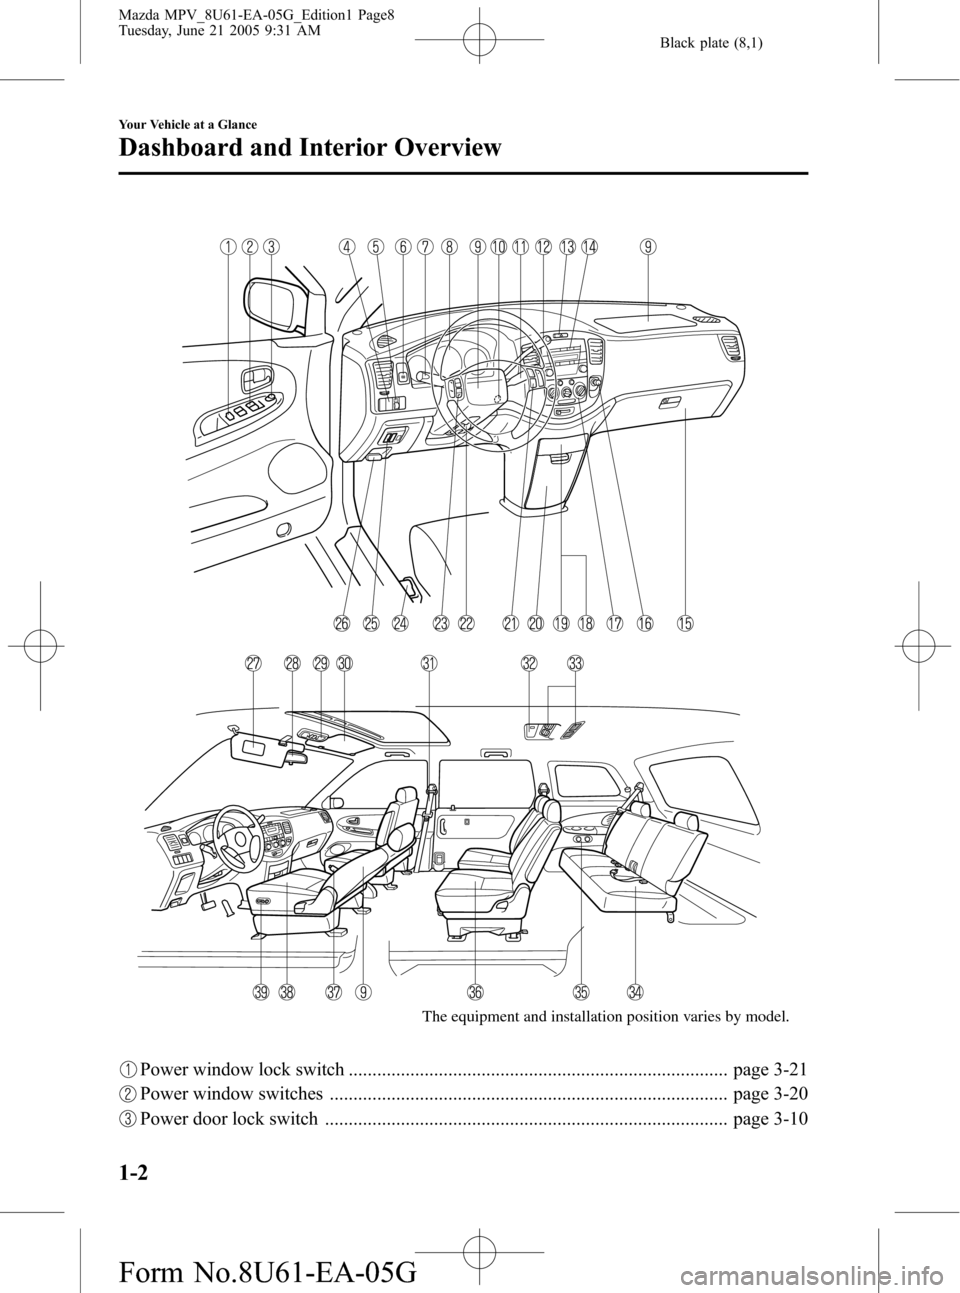 MAZDA MODEL MPV 2006  Owners Manual (in English) Black plate (8,1)
The equipment and installation position varies by model.
Power window lock switch ................................................................................ page 3-21
Power win